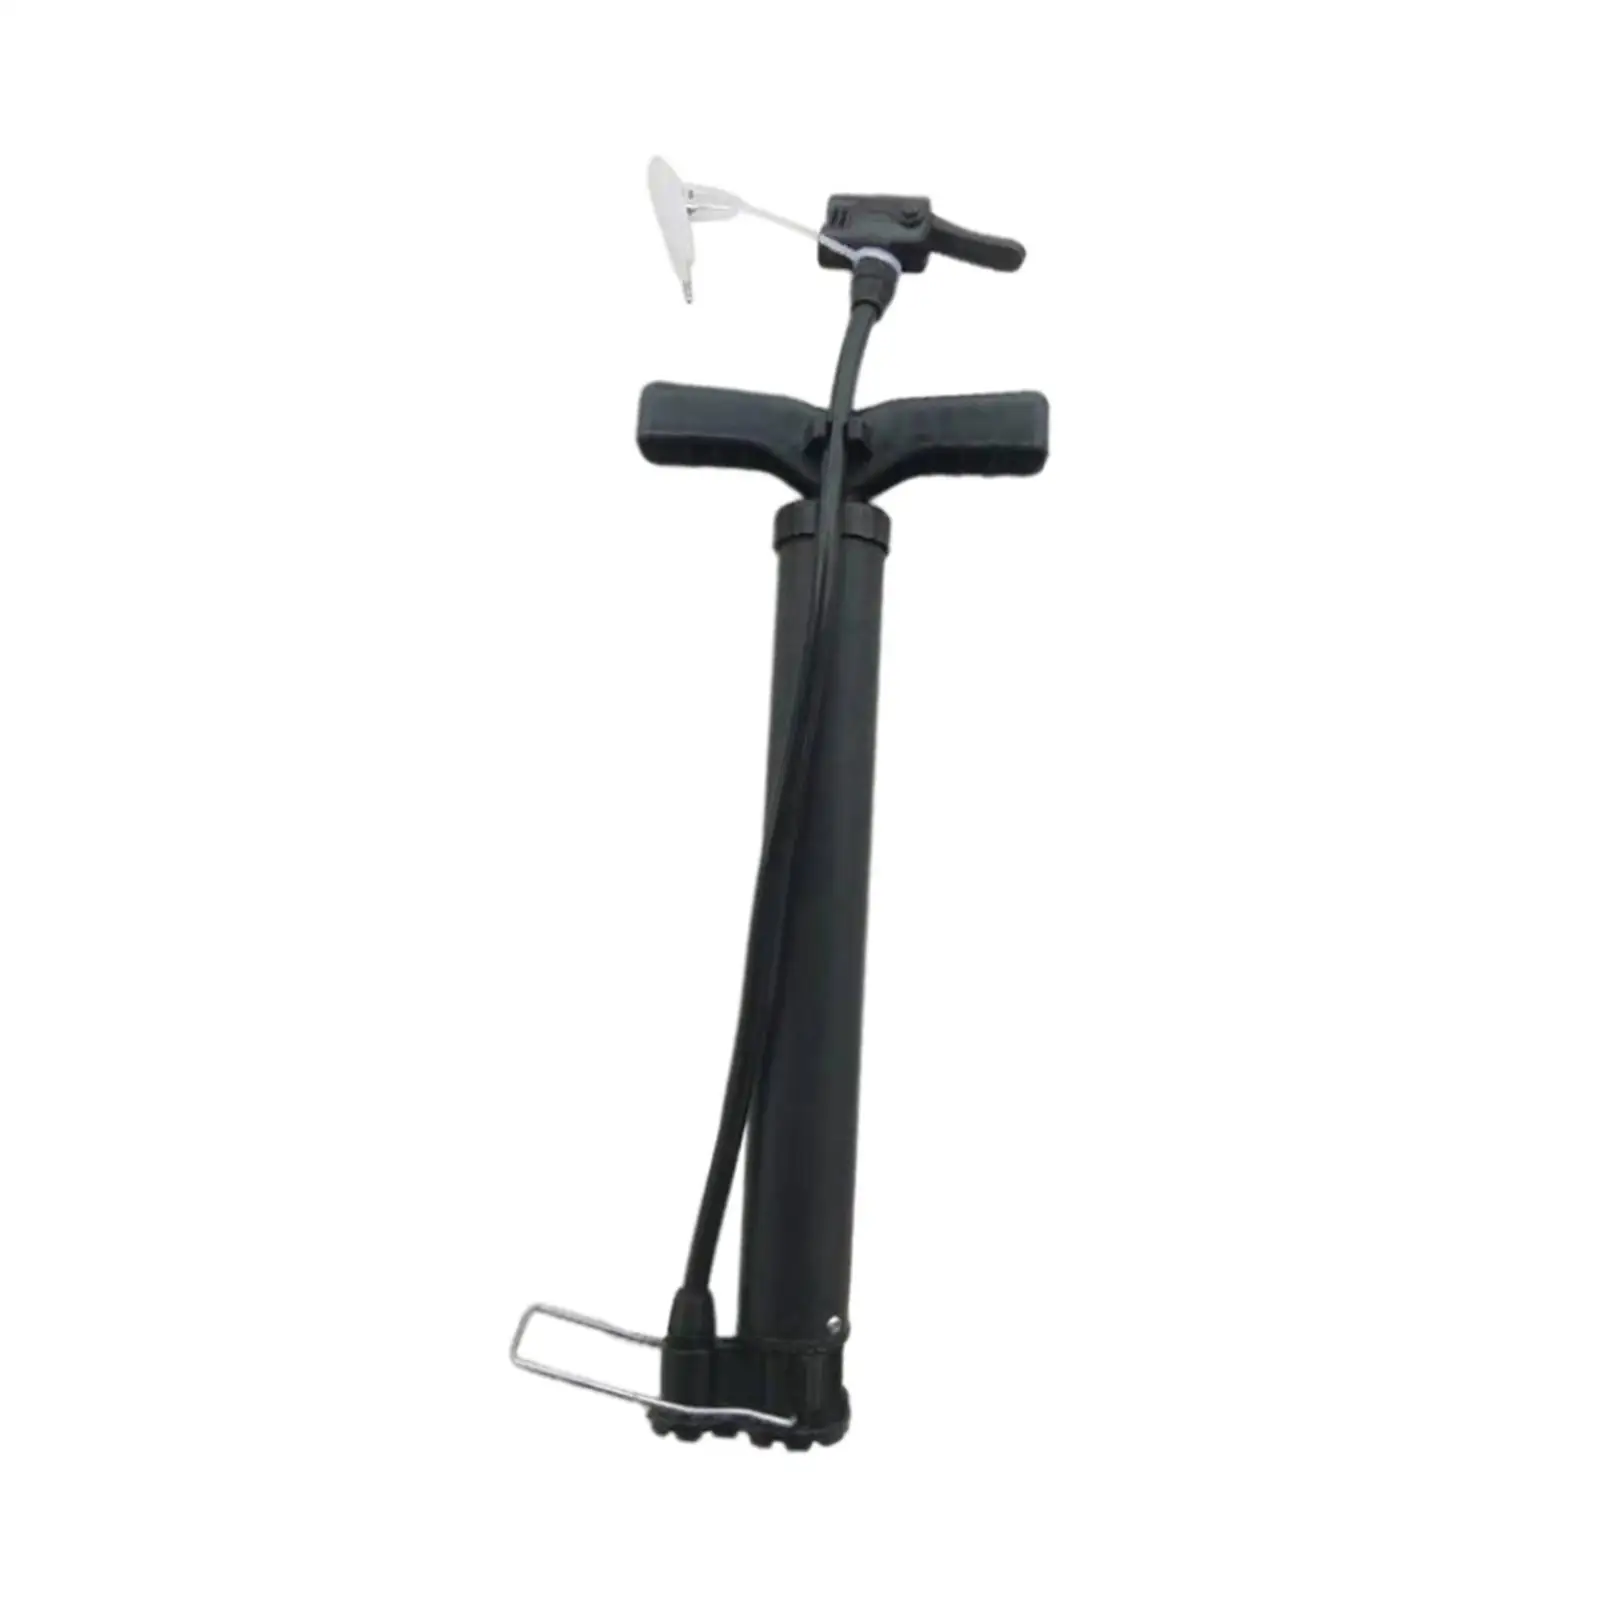 Bike Tire Pump Portable Multi Purpose Hand Pumps Air Inflator for Inflatable Toys Mountain Road Bikes Tires Balls